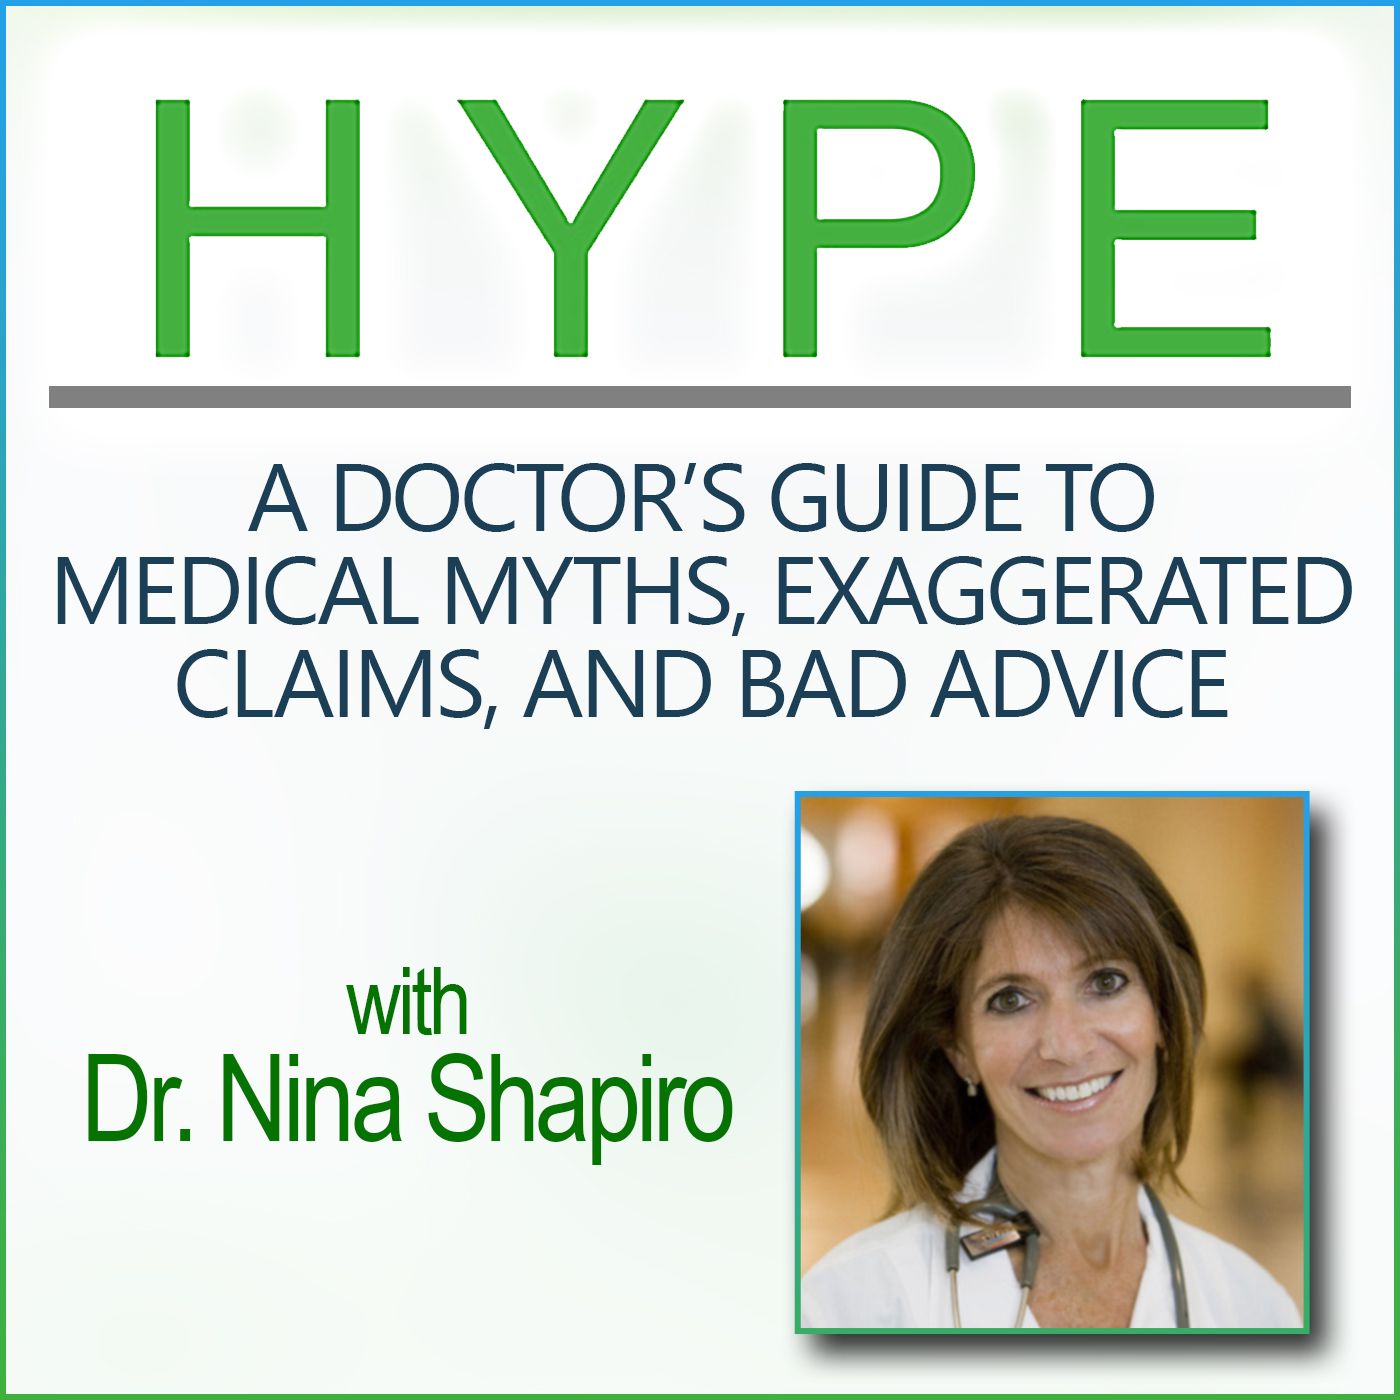 Hype: A Doctor’s Guide to Medical Myths, Exaggerated Claims, and Bad Advice (with Dr. Nina Shapiro)